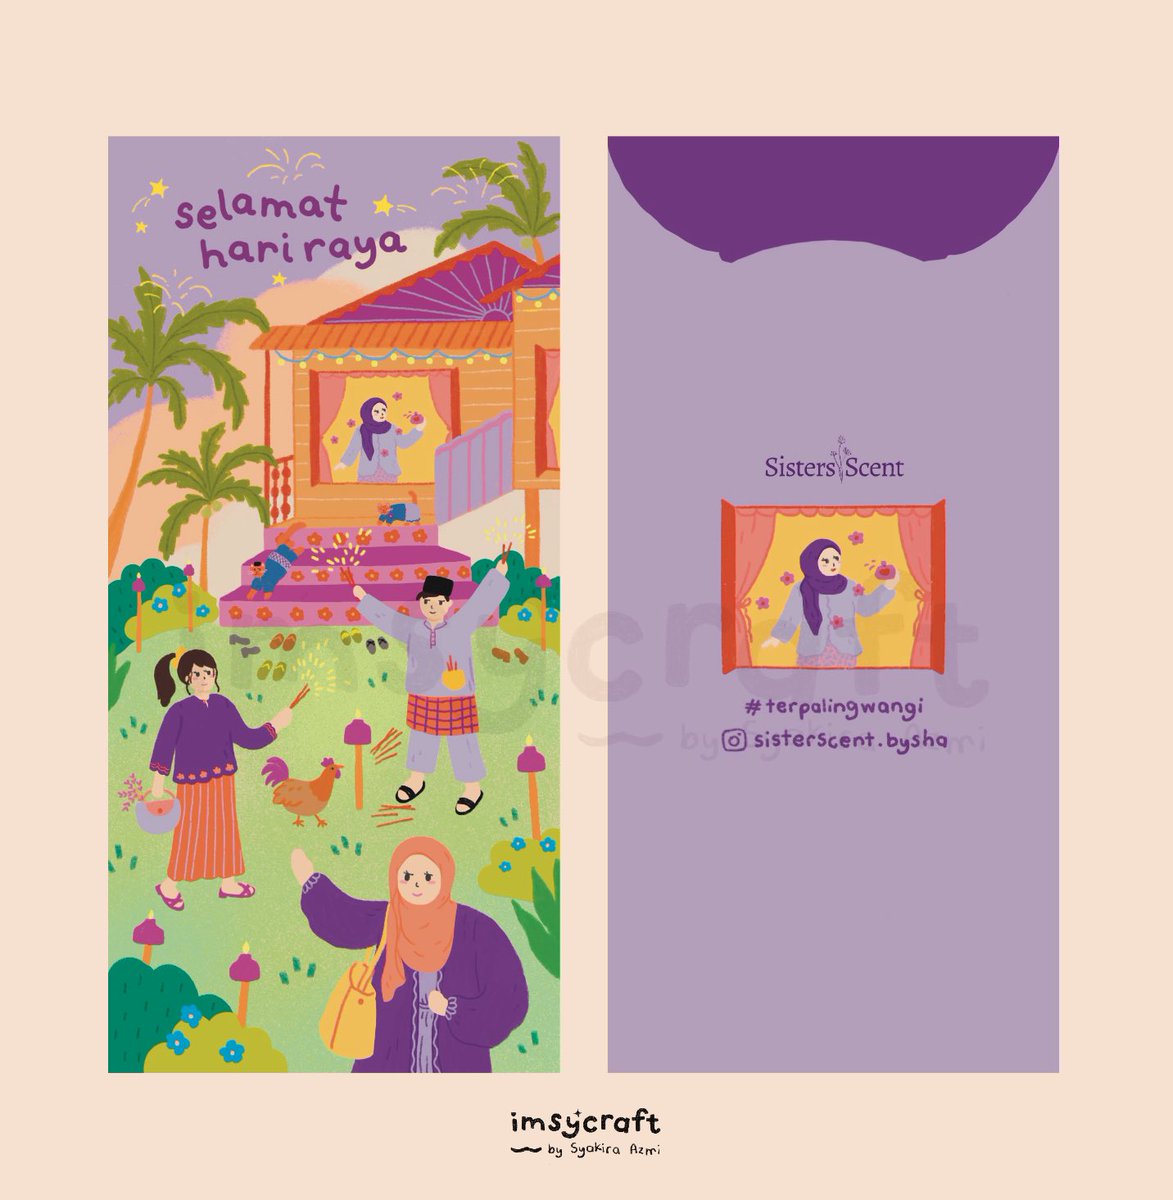 just finished making sampul raya illustration for my sister. she’s selling perfume and wanted to give the sampul as freegifts.

i rarely use purple bcs i dont like it much but it’s my sister’s fav colour 😆 glad she likes this tho.